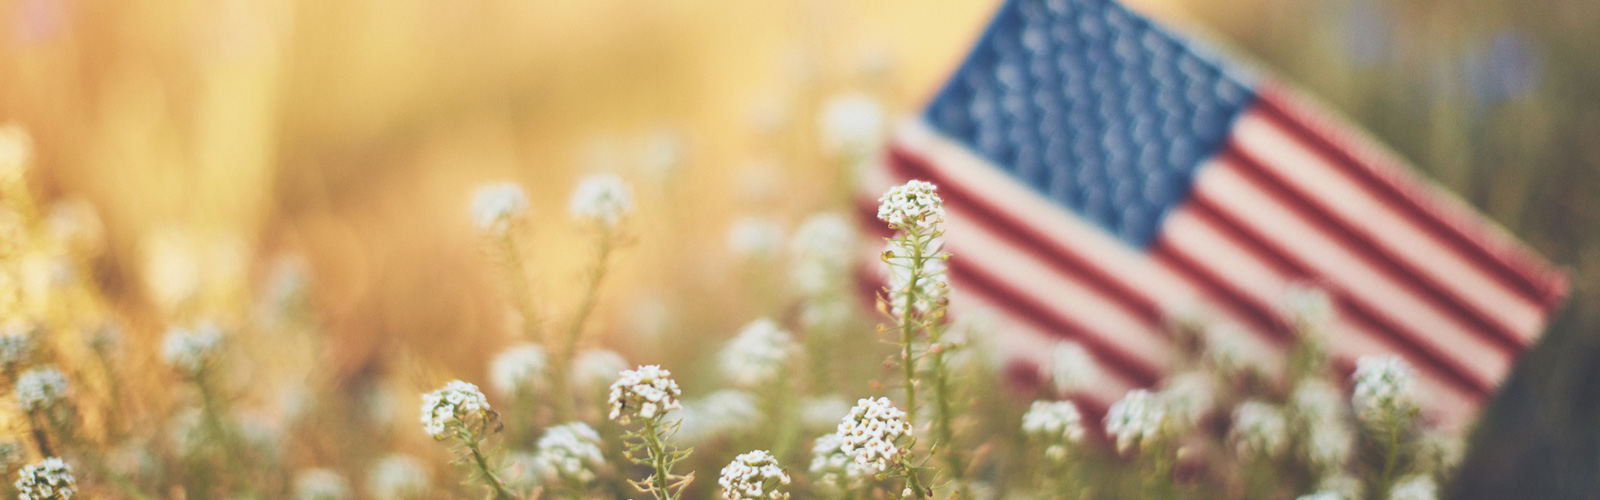 American flag in the grass